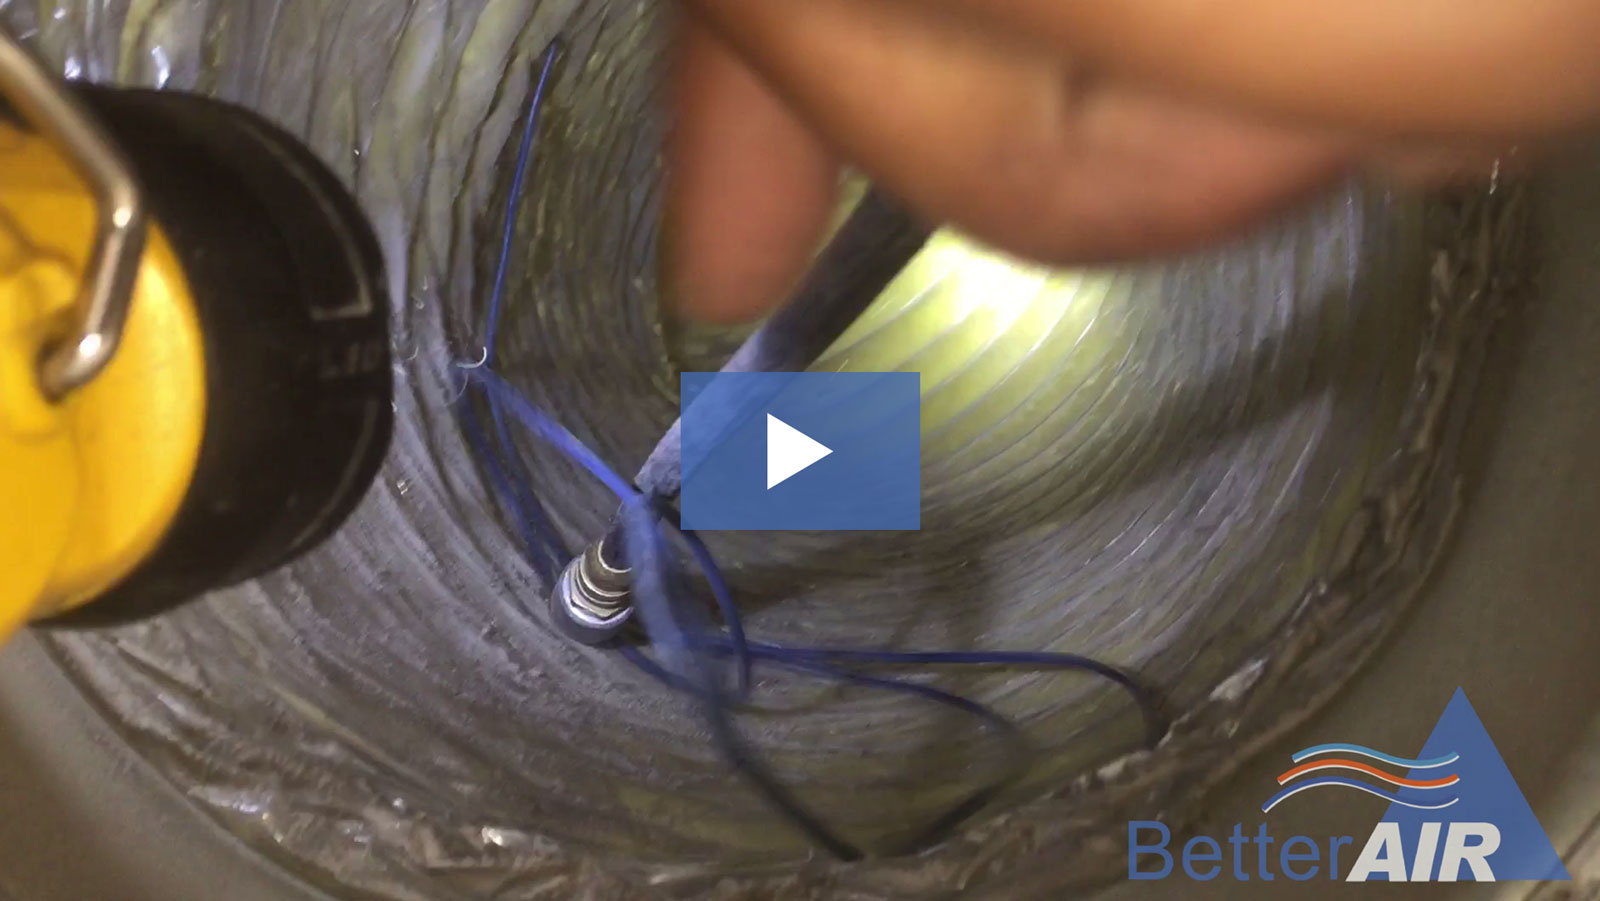 Video: Better Air's NADCA Certified Technician cleaning a customer's Flex Air Duct - INSTANT BEFORE AND AFTER.